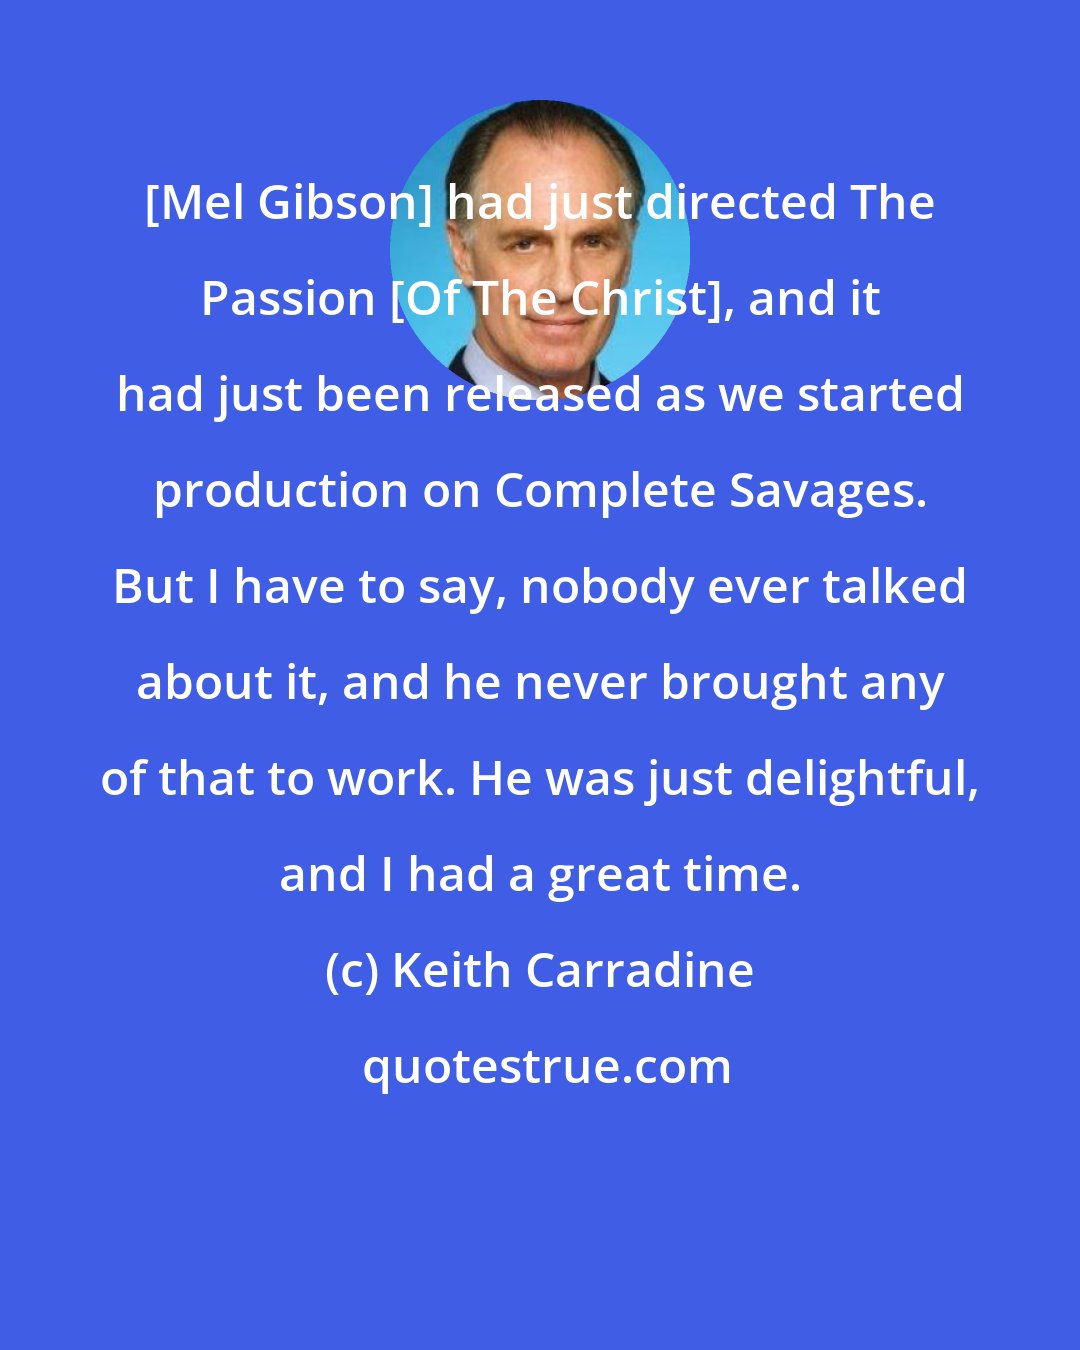 Keith Carradine: [Mel Gibson] had just directed The Passion [Of The Christ], and it had just been released as we started production on Complete Savages. But I have to say, nobody ever talked about it, and he never brought any of that to work. He was just delightful, and I had a great time.